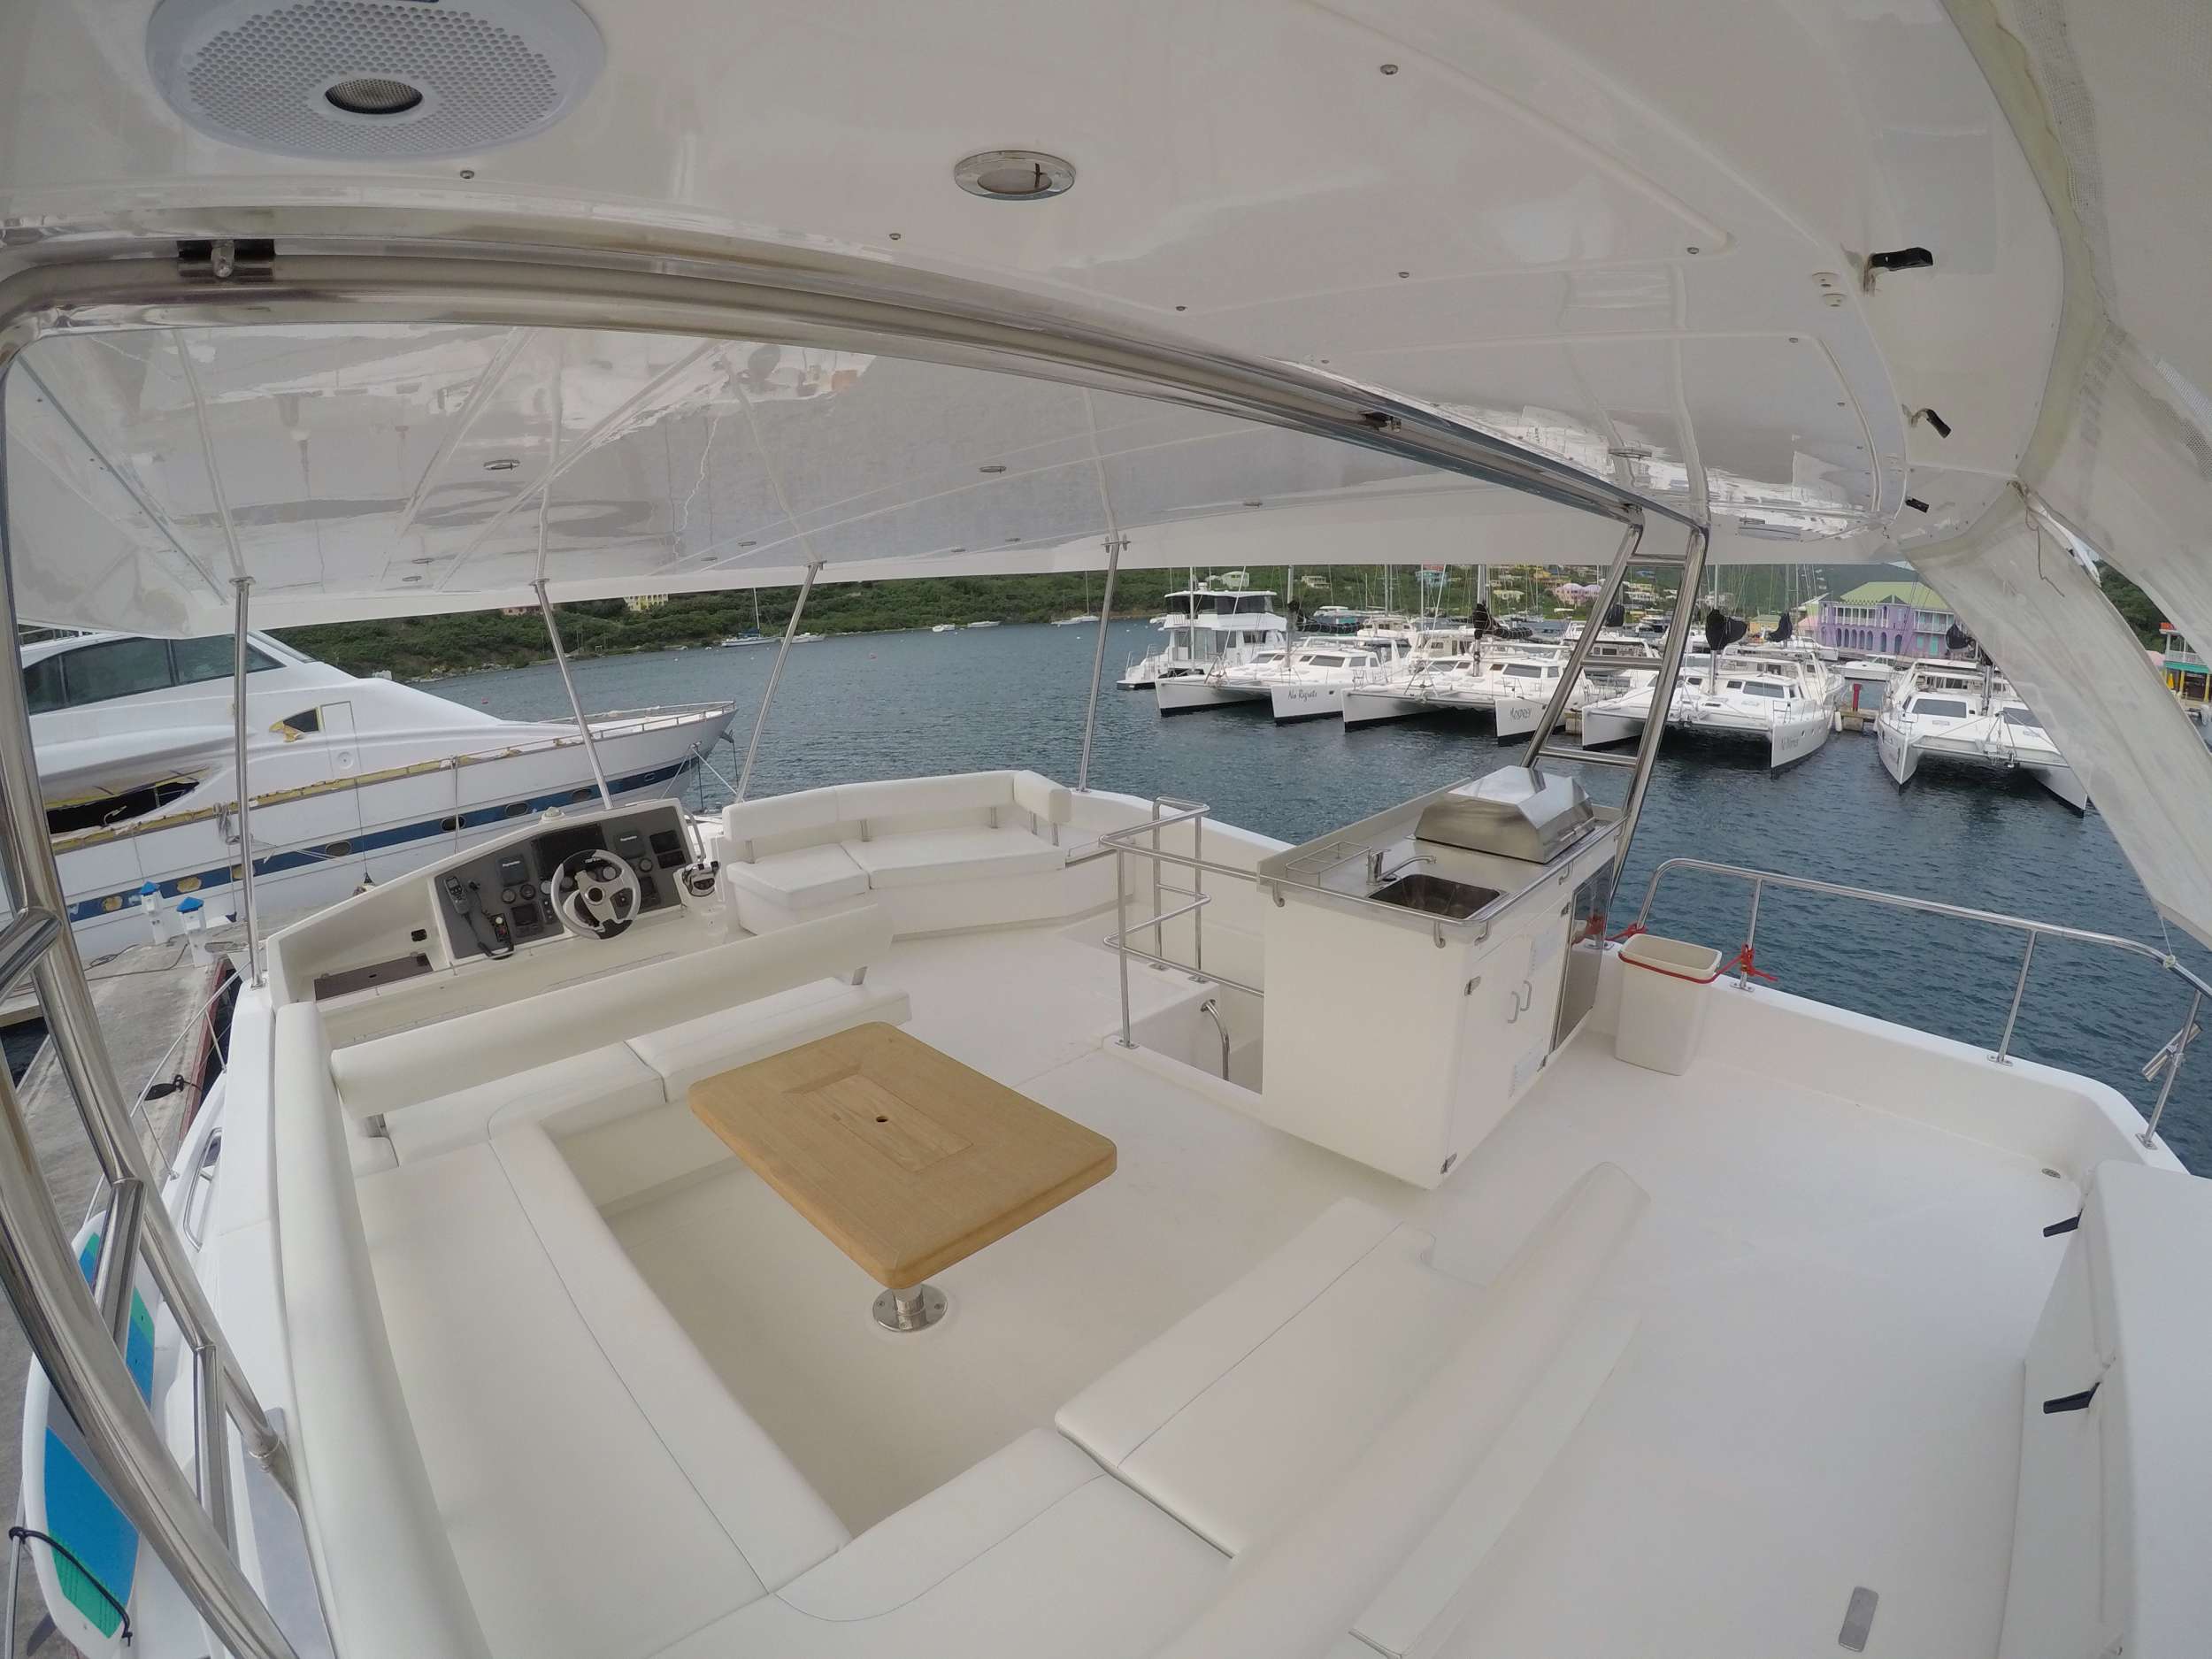 SOMEWHERE HOT Yacht Charter - Flybridge seating with new teak table